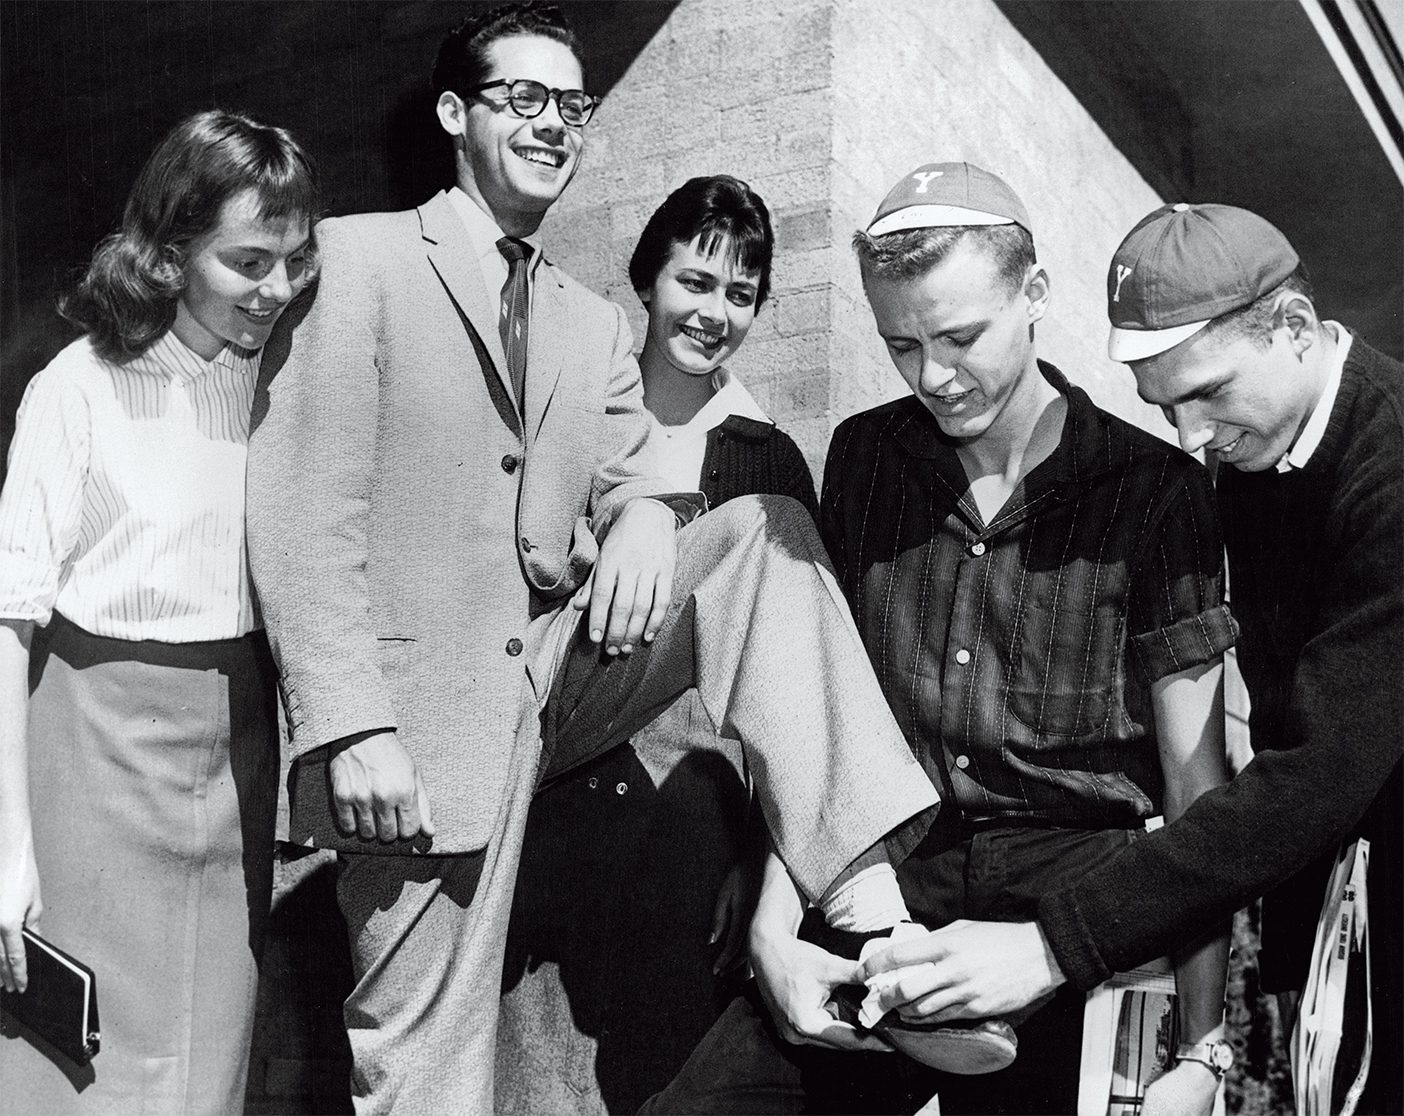 An archival photo from 1958 of BYU freshmen shining shoes.